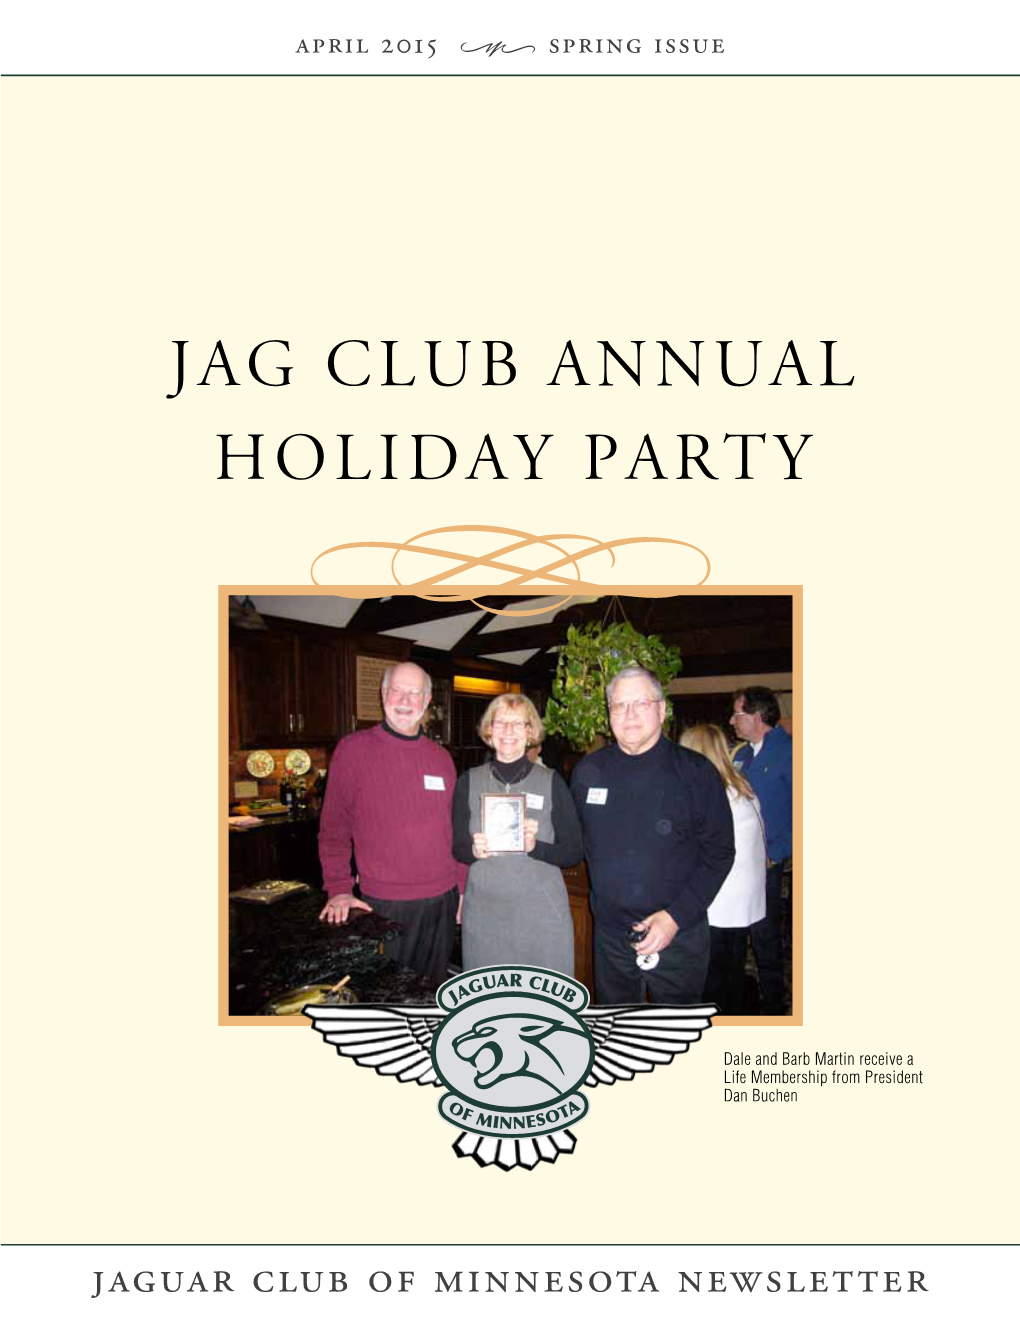 Jag Club Annual Holiday Party